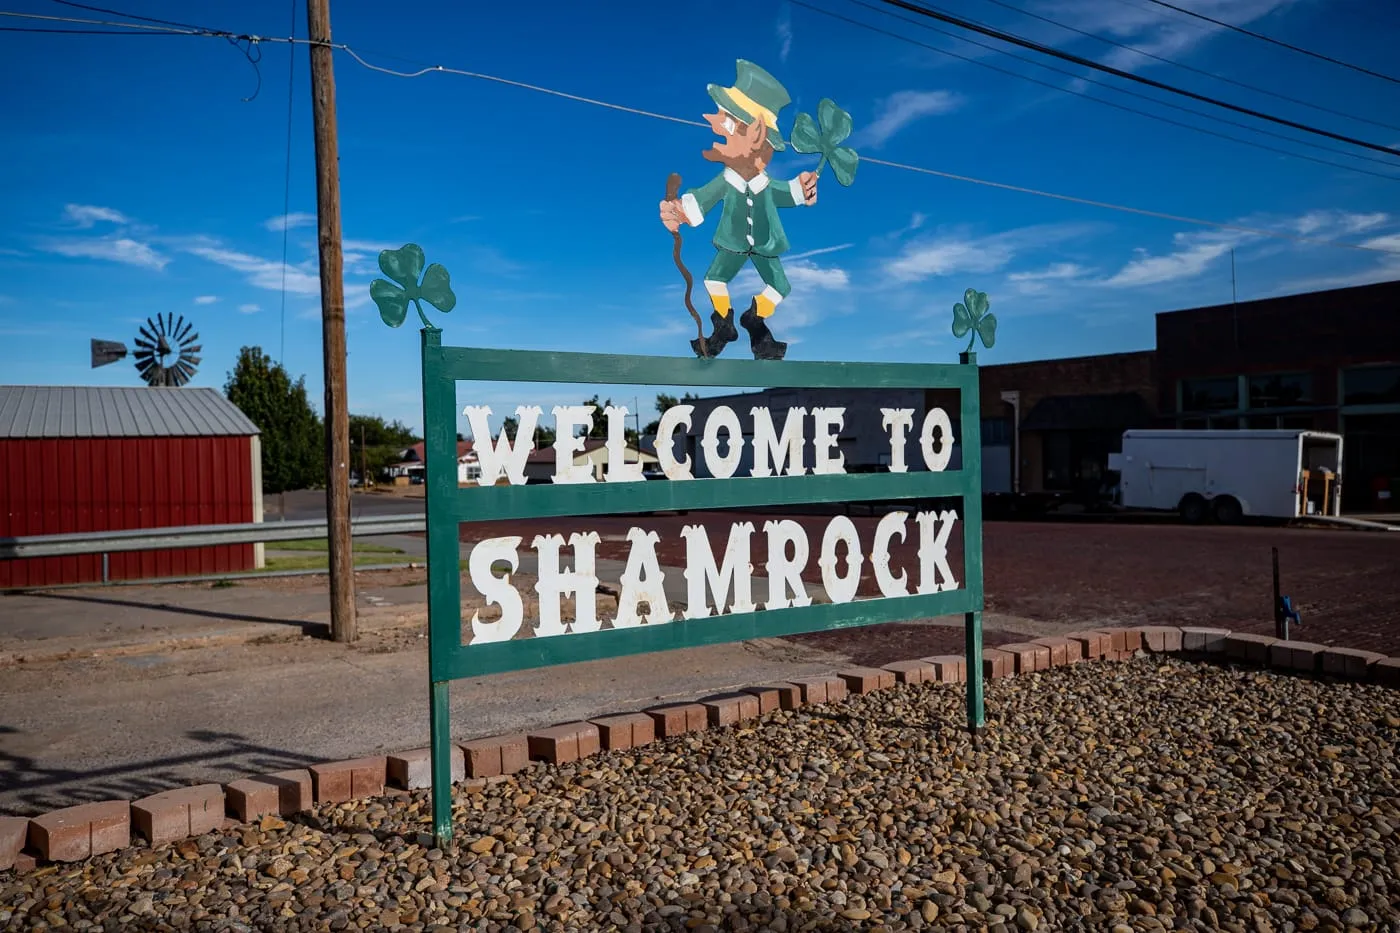 Welcome to Shamrock Sign in Shamrock, Texas on Route 66